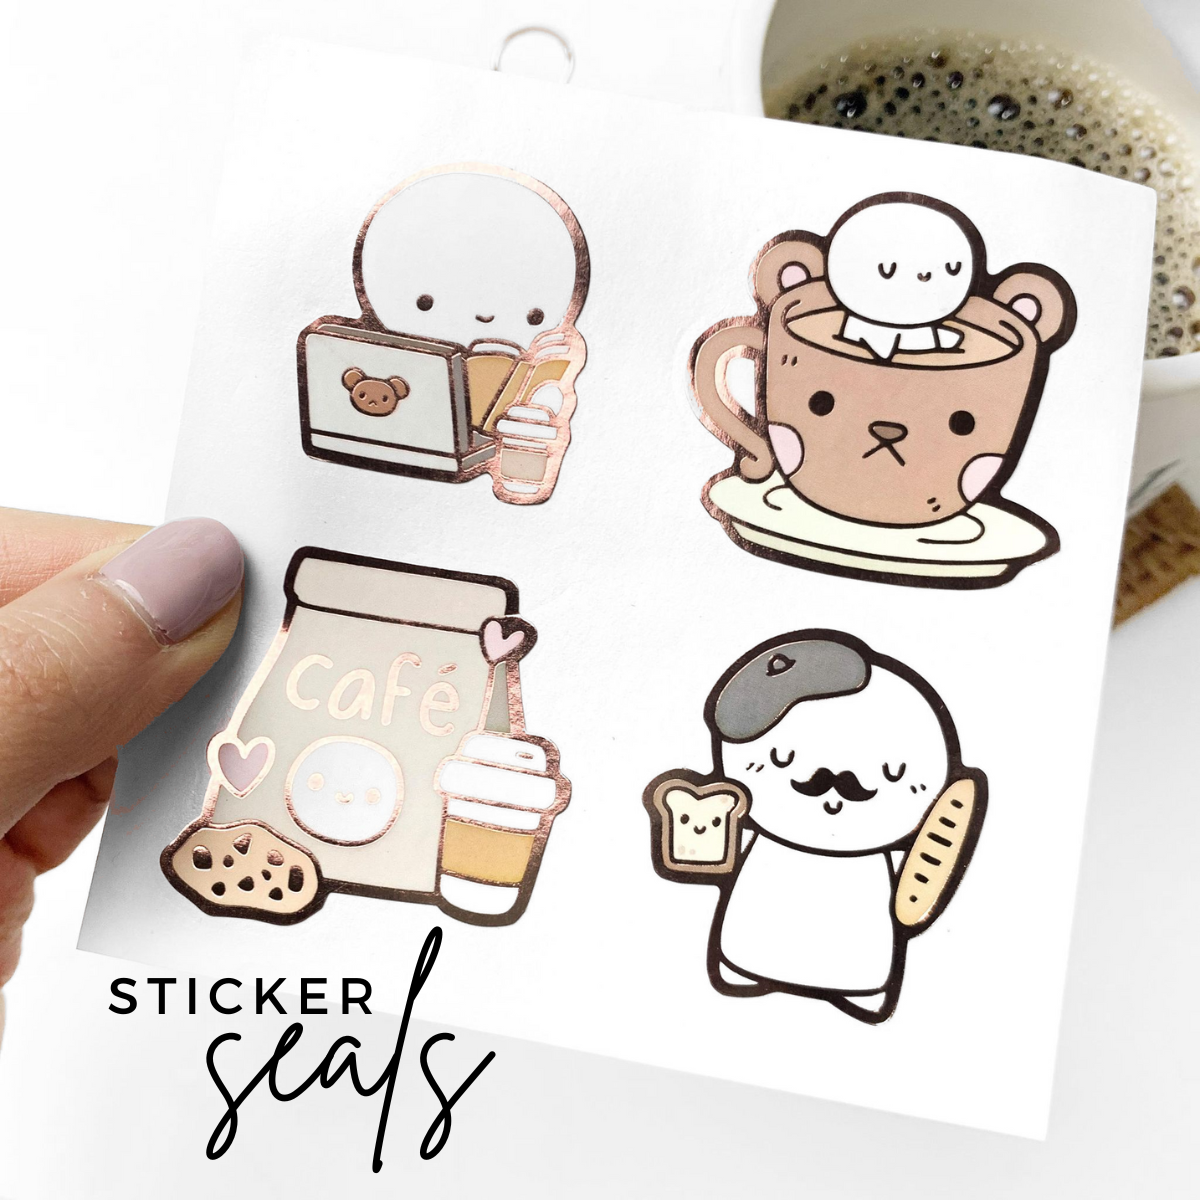 COMFY FALL WAX SEALS STICKER PACK - NEW RELEASE – Moxie Chick Studio